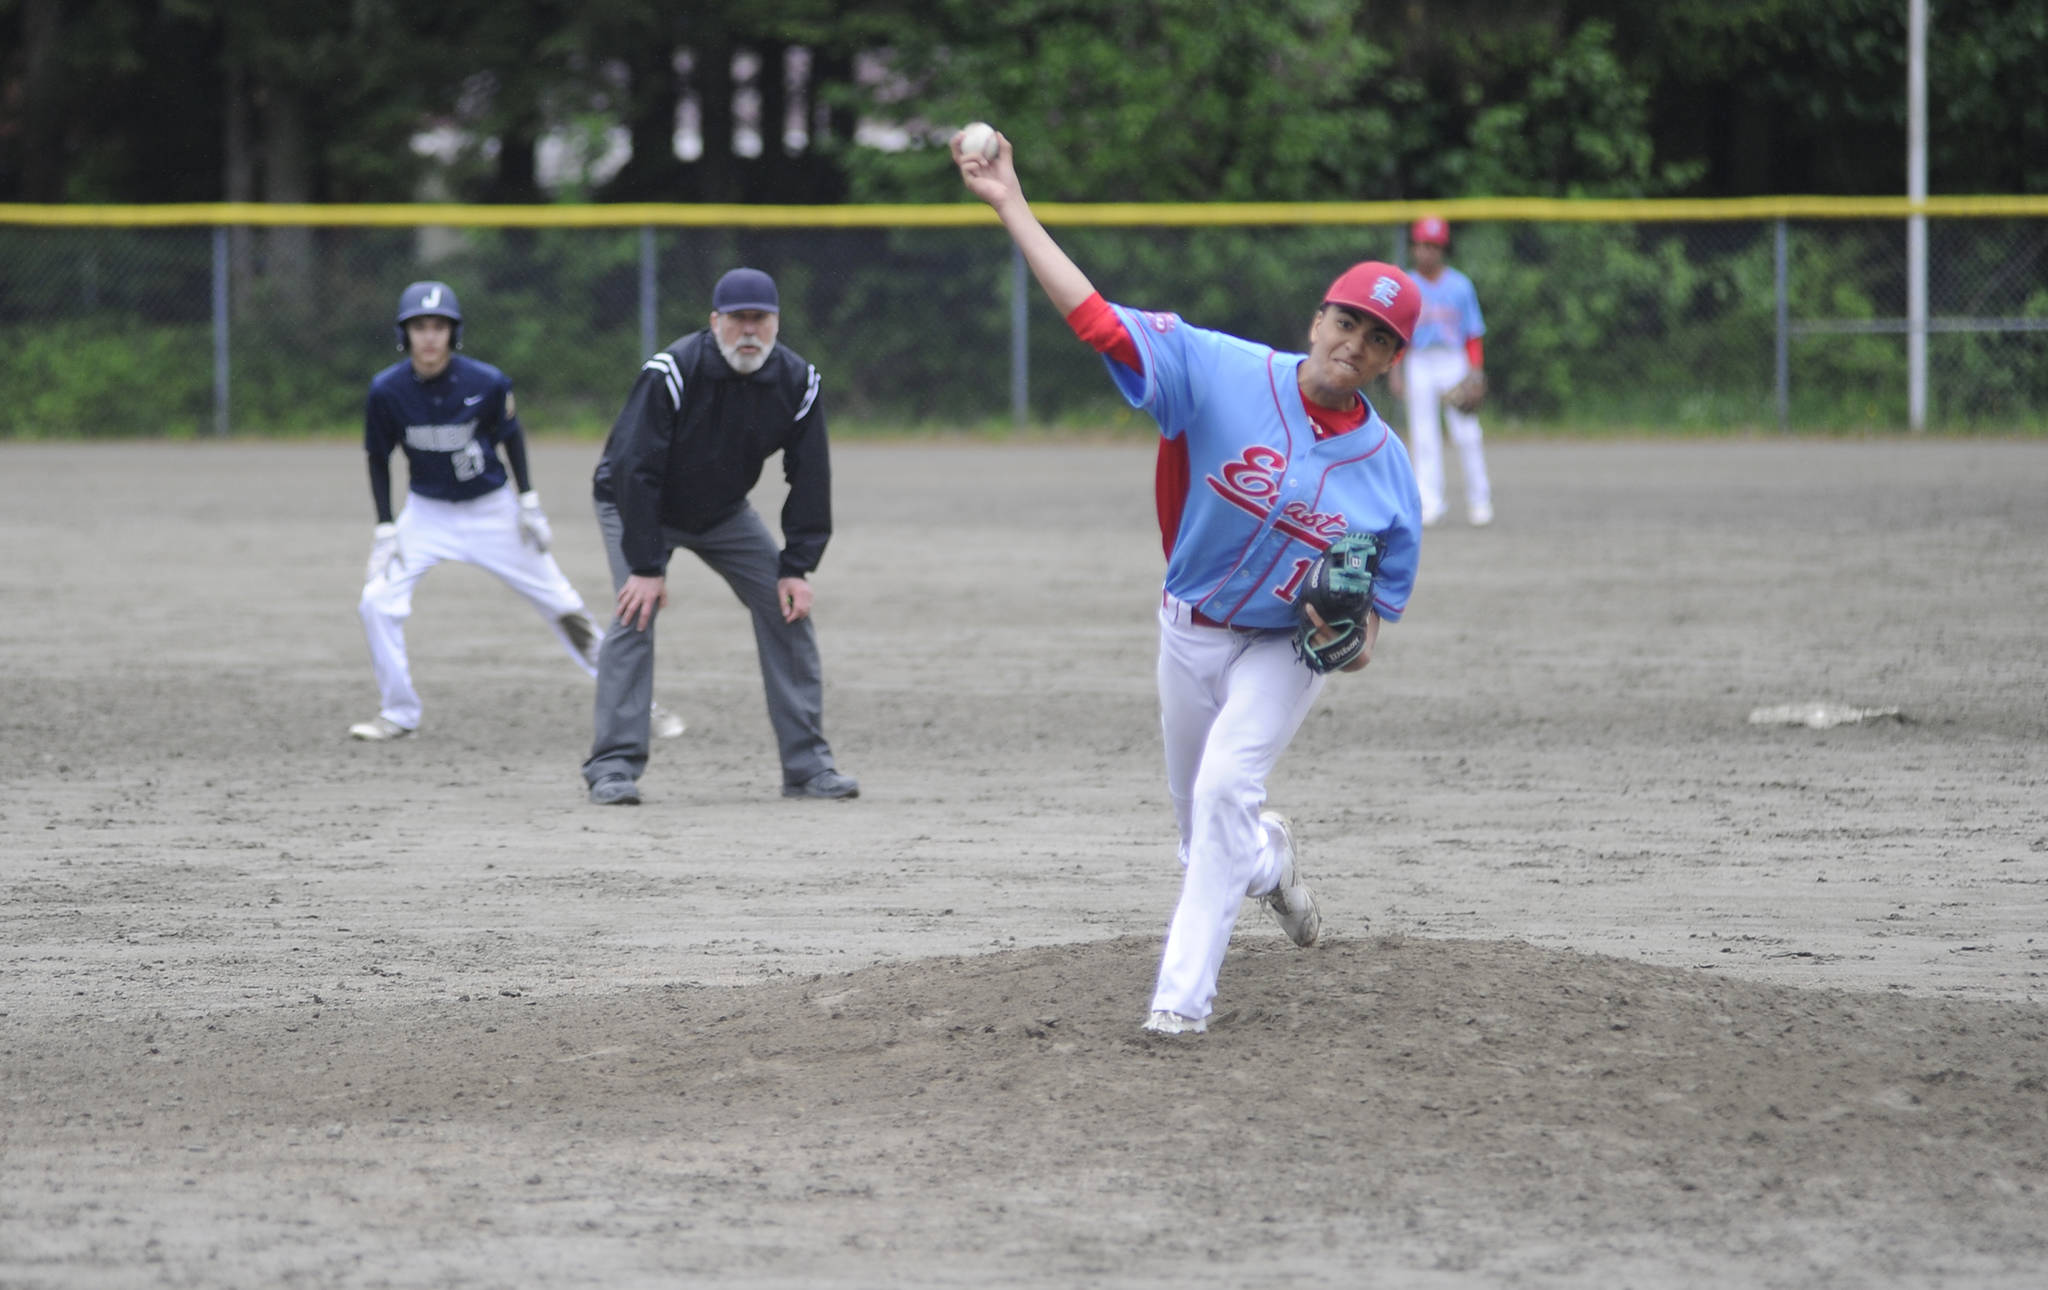 East Post 34 player Charlie White pitches against Juneau Post 25 at Adair-Kennedy Memorial Field in the first game of a doubleheader on Saturday. Juneau won 12-2. (Nolin Ainsworth | Juneau Empire)